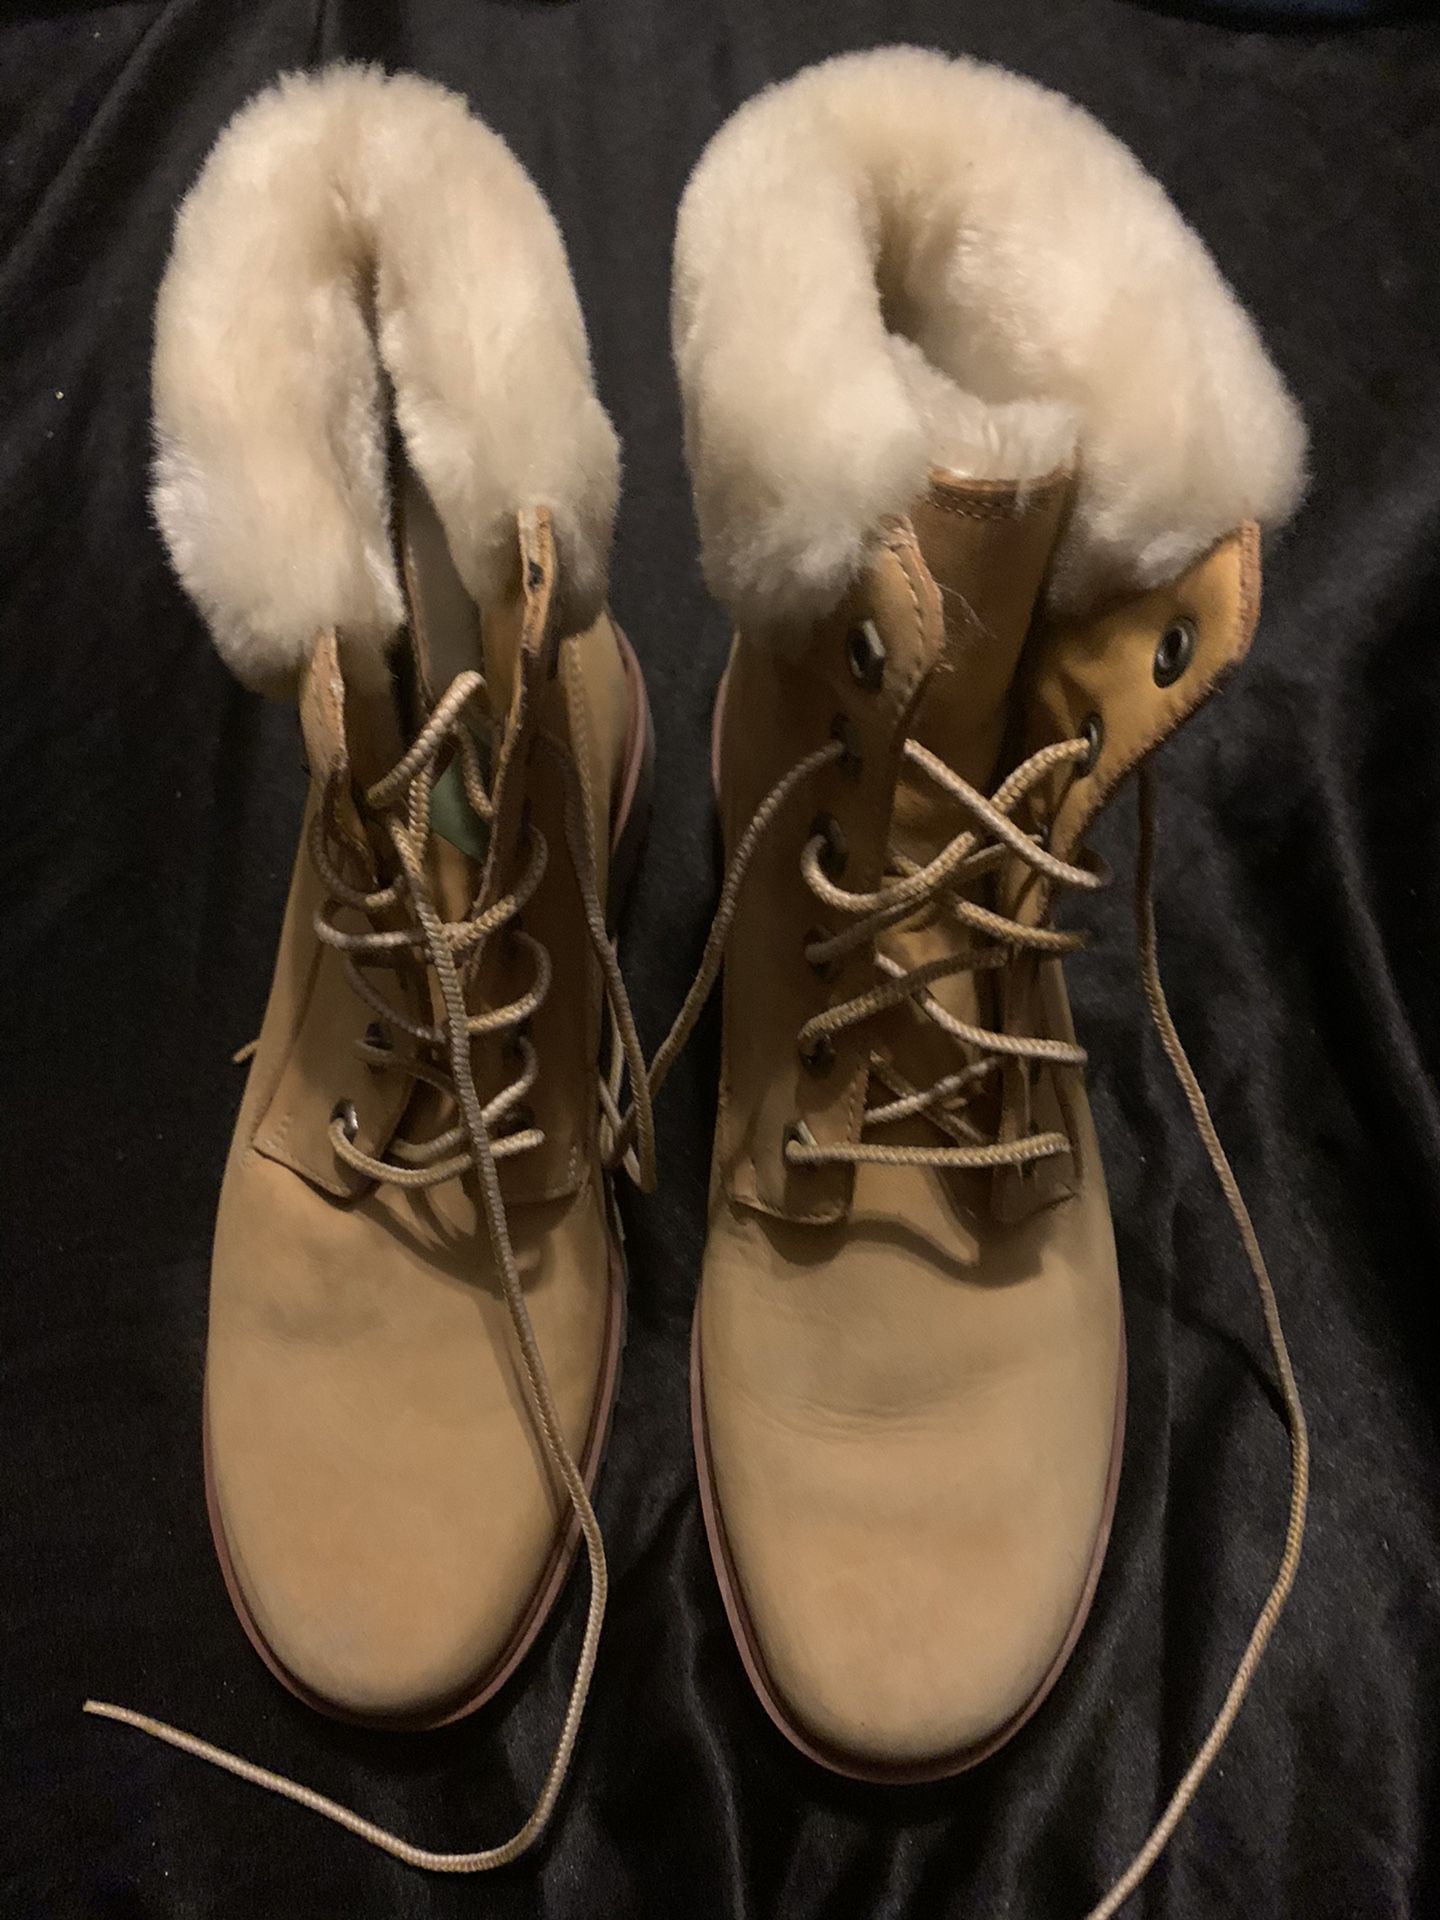 TIMBERLAND BOOTS ALMOST NEW WEAR THEM COUPLE OF TIMES SIZE 8